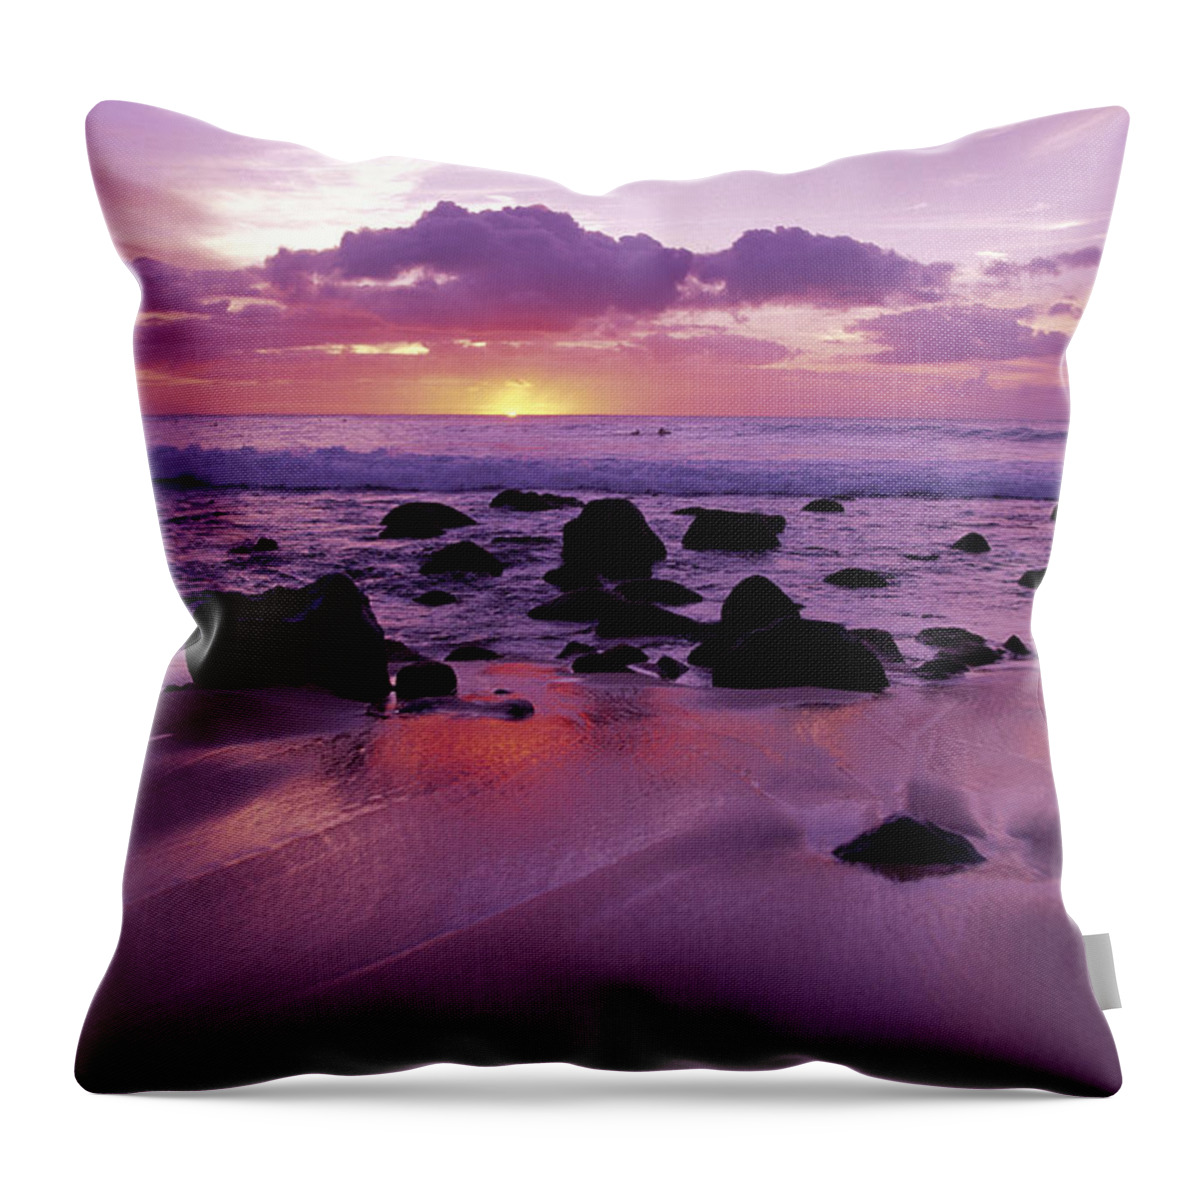 Amaze Throw Pillow featuring the photograph Molokai West Shore Sunset by Ron Dahlquist - Printscapes